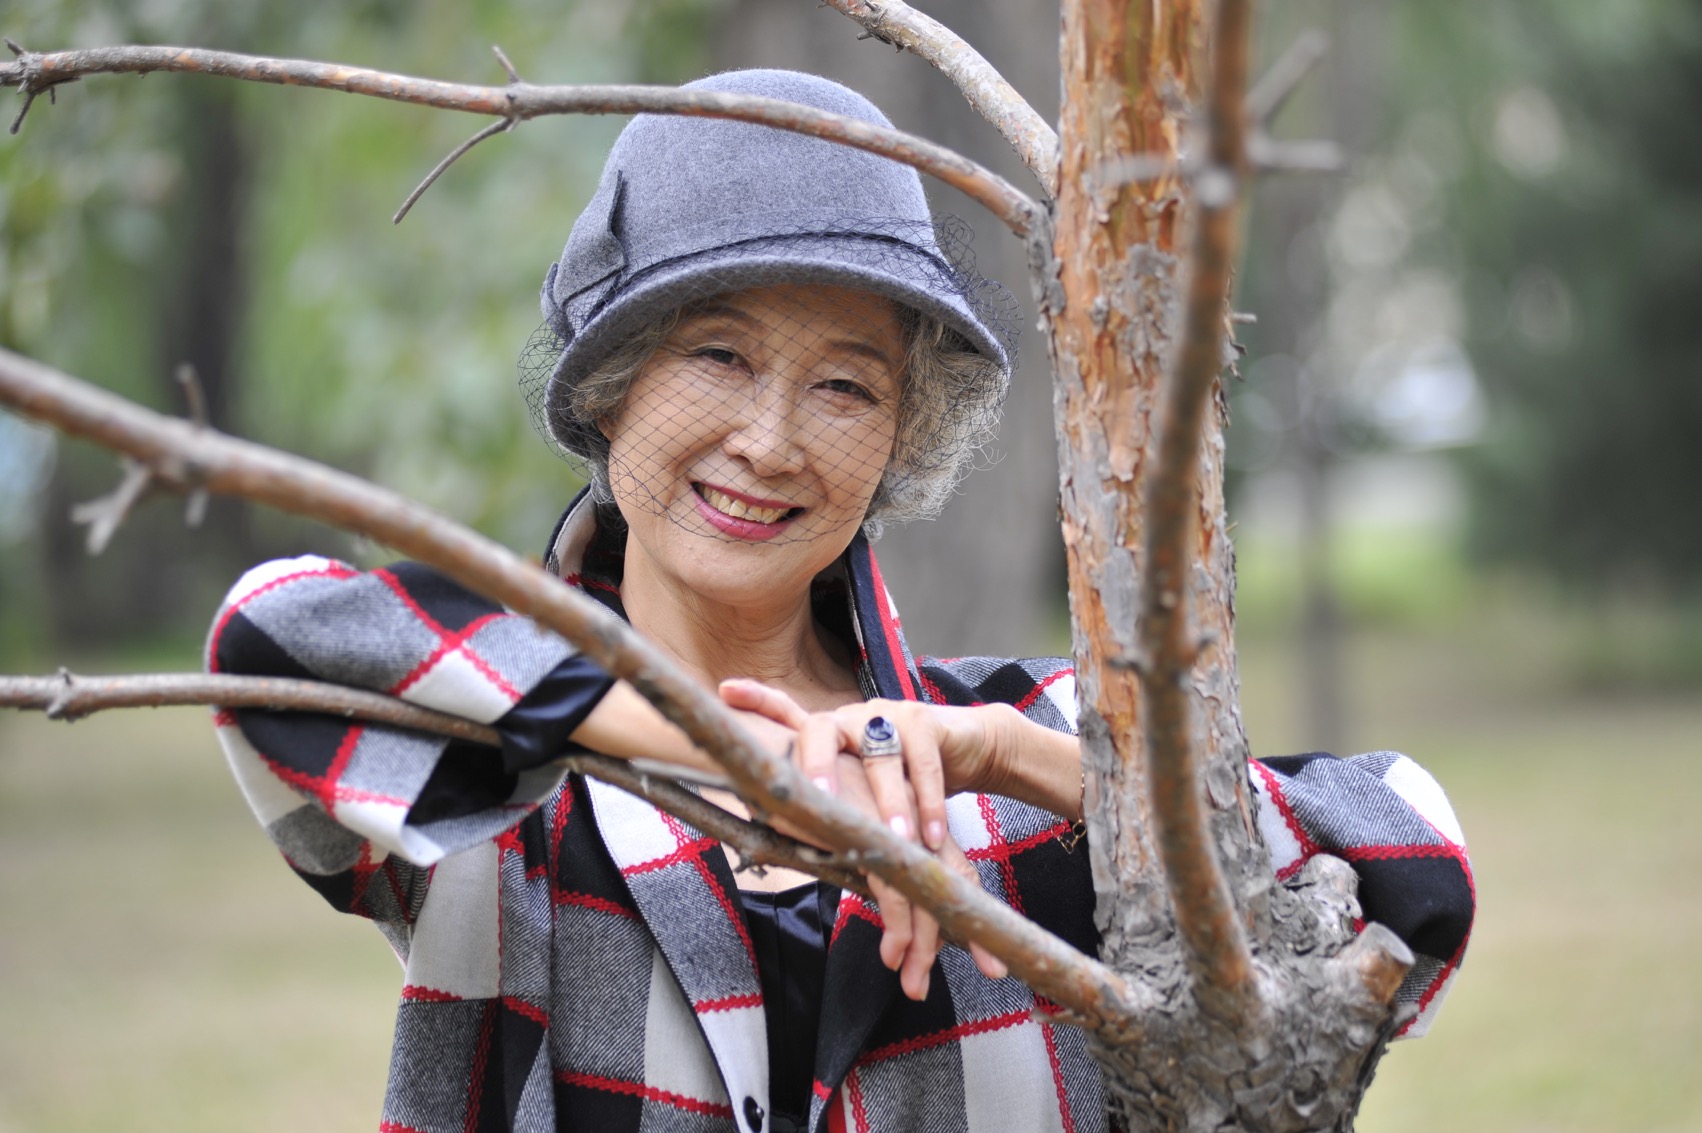 China S Hottest Granny At 70 Has Big Plans Ahead Featured The China Project